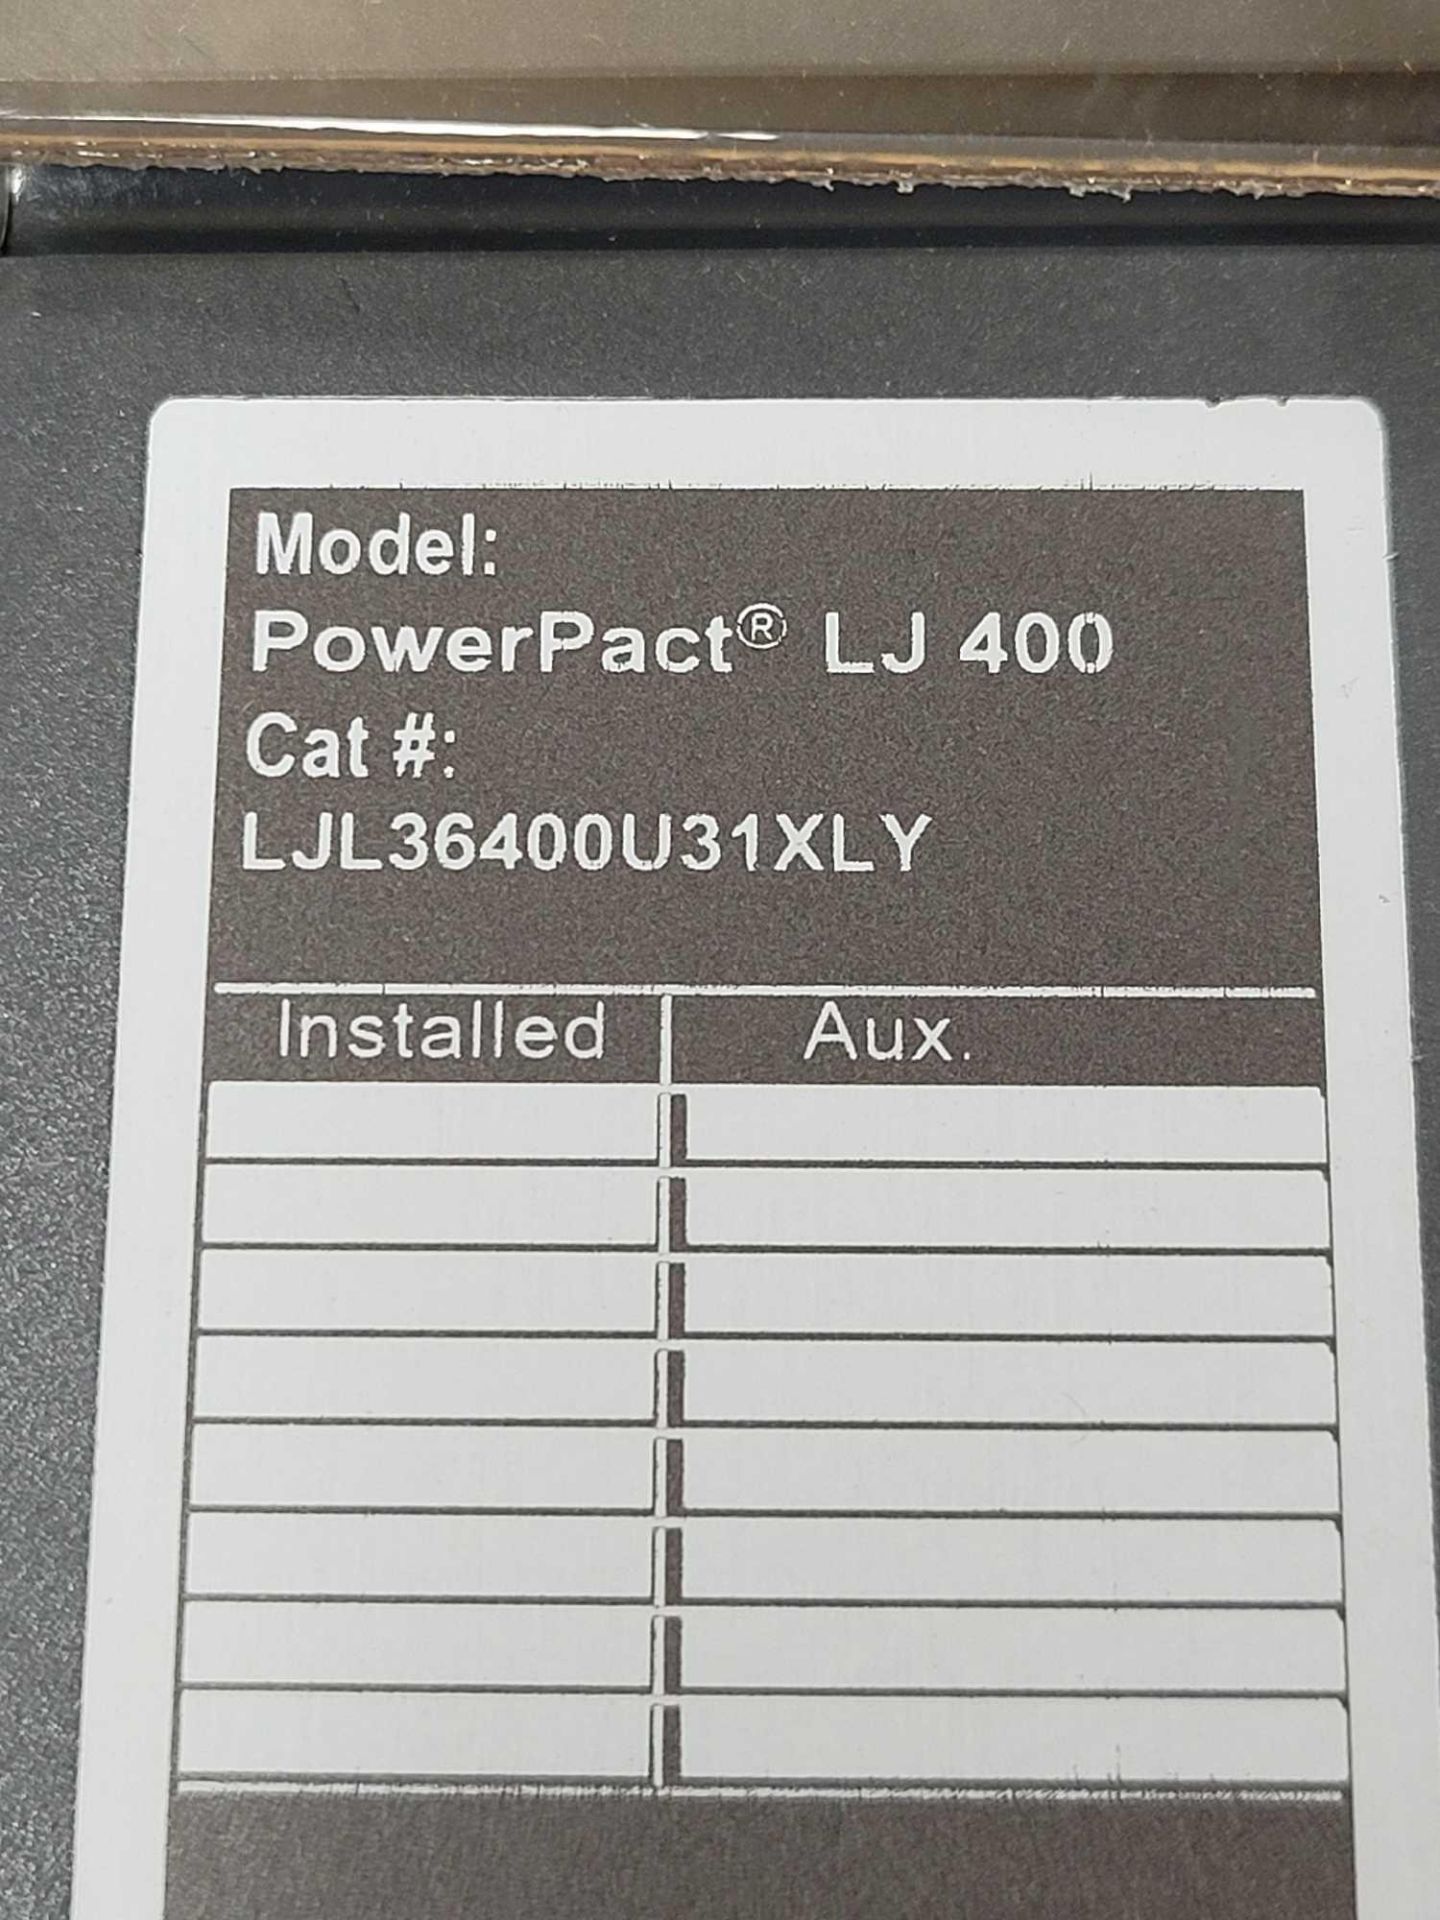 SQUARE D LJL36400U31XLY / 400 Amp Molded Case Circuit Breaker  /  Lot Weight: 13.0 lbs - Image 7 of 7